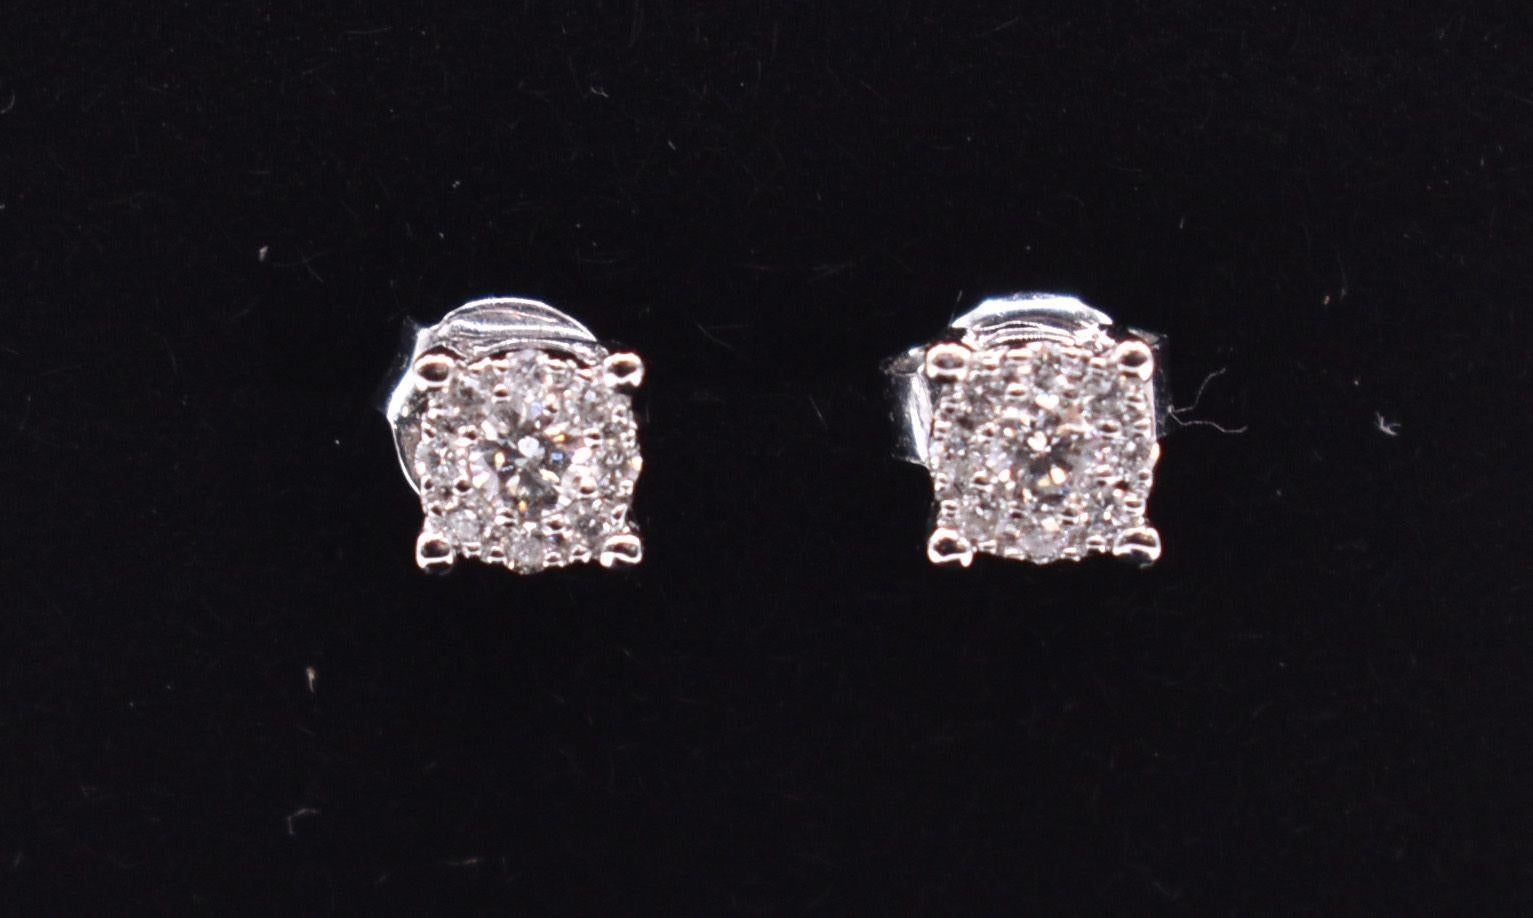 Pair of 18k White Gold Illusion Diamond Stud Earrings For Sale 2